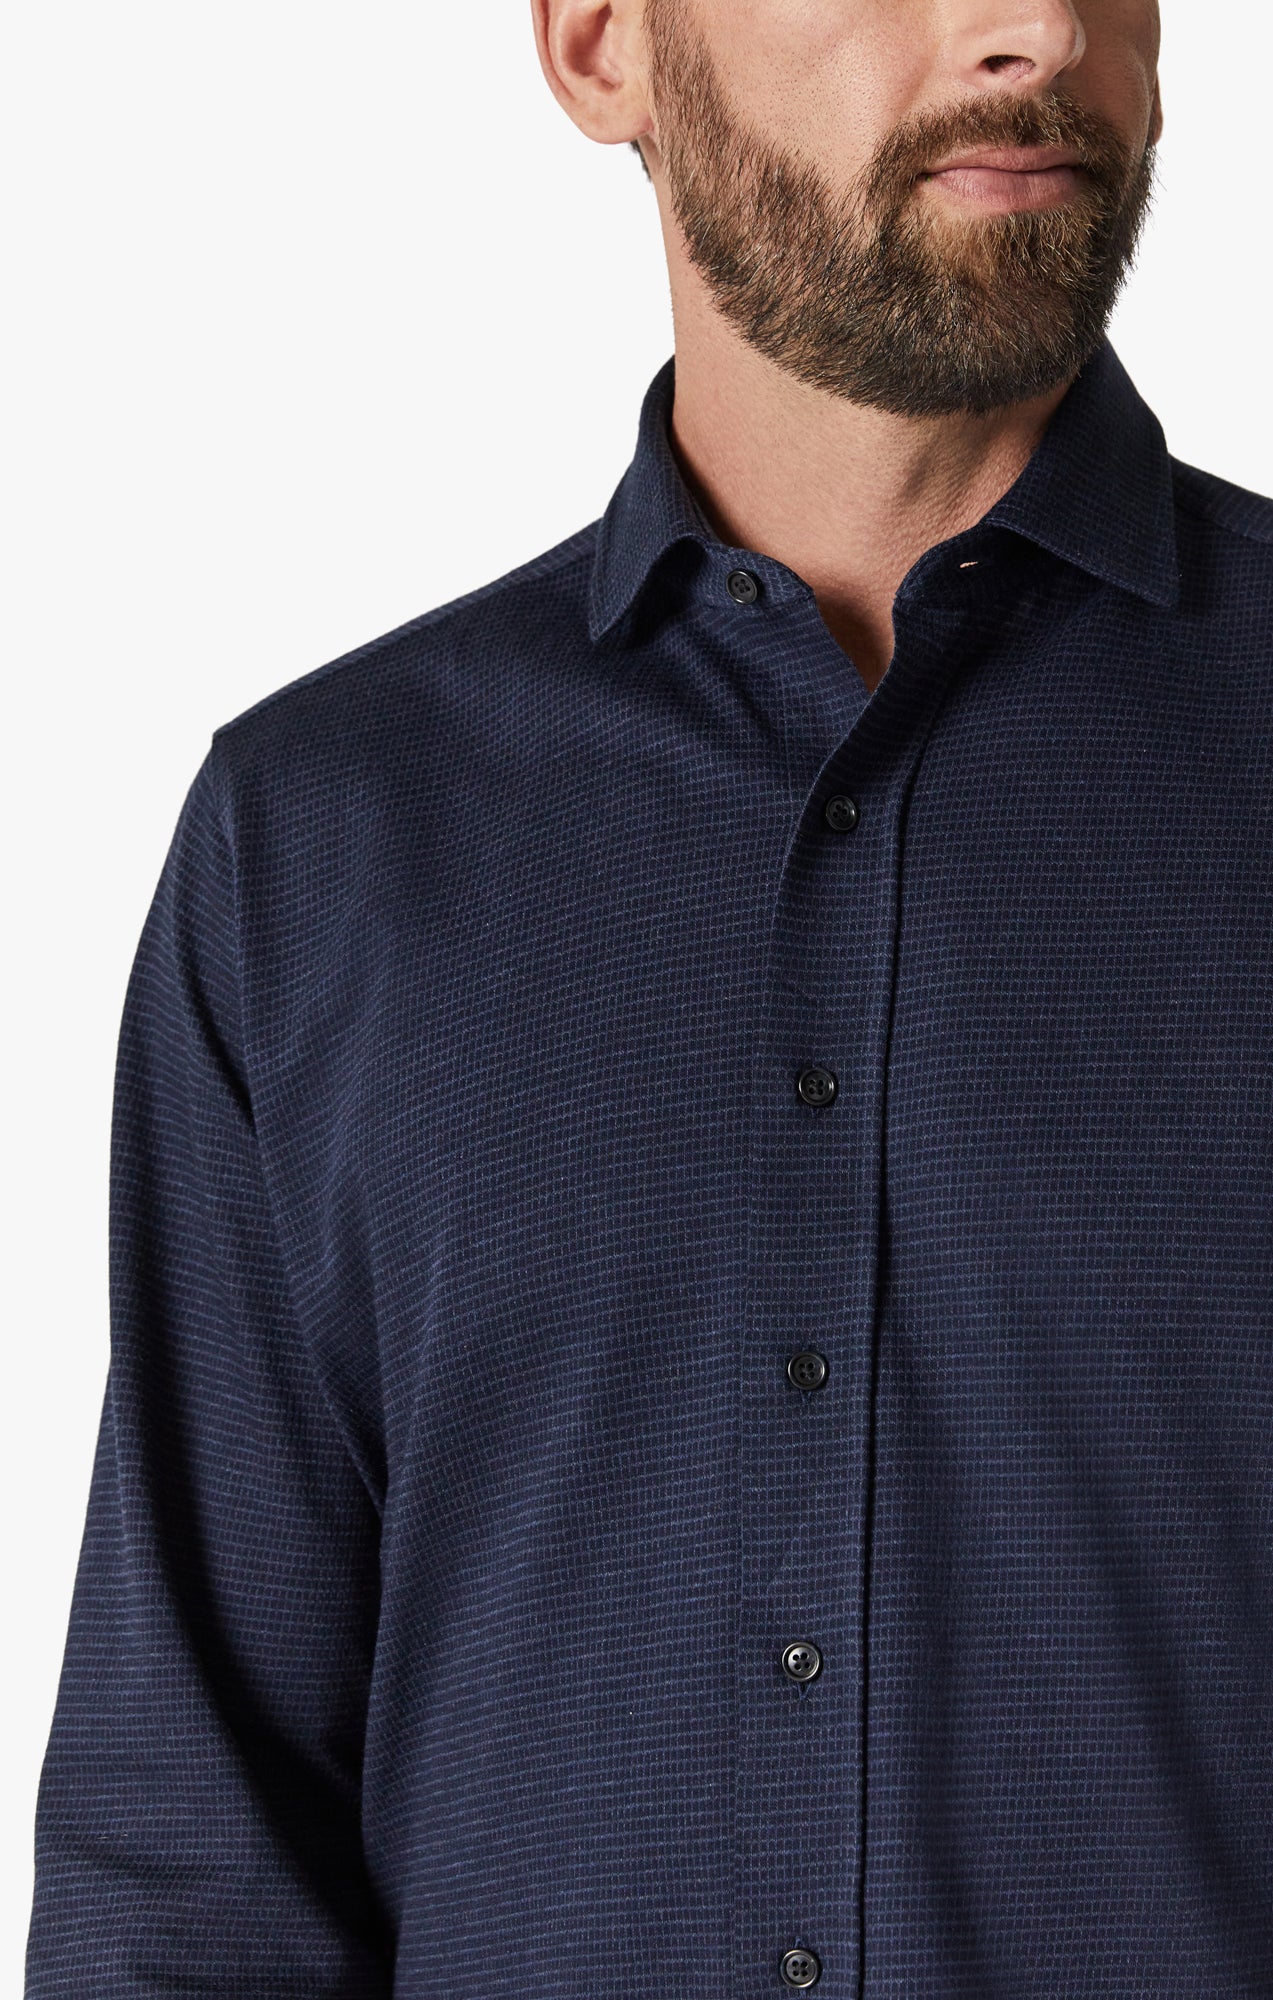 Structured Shirt In Navy Blue Image 5